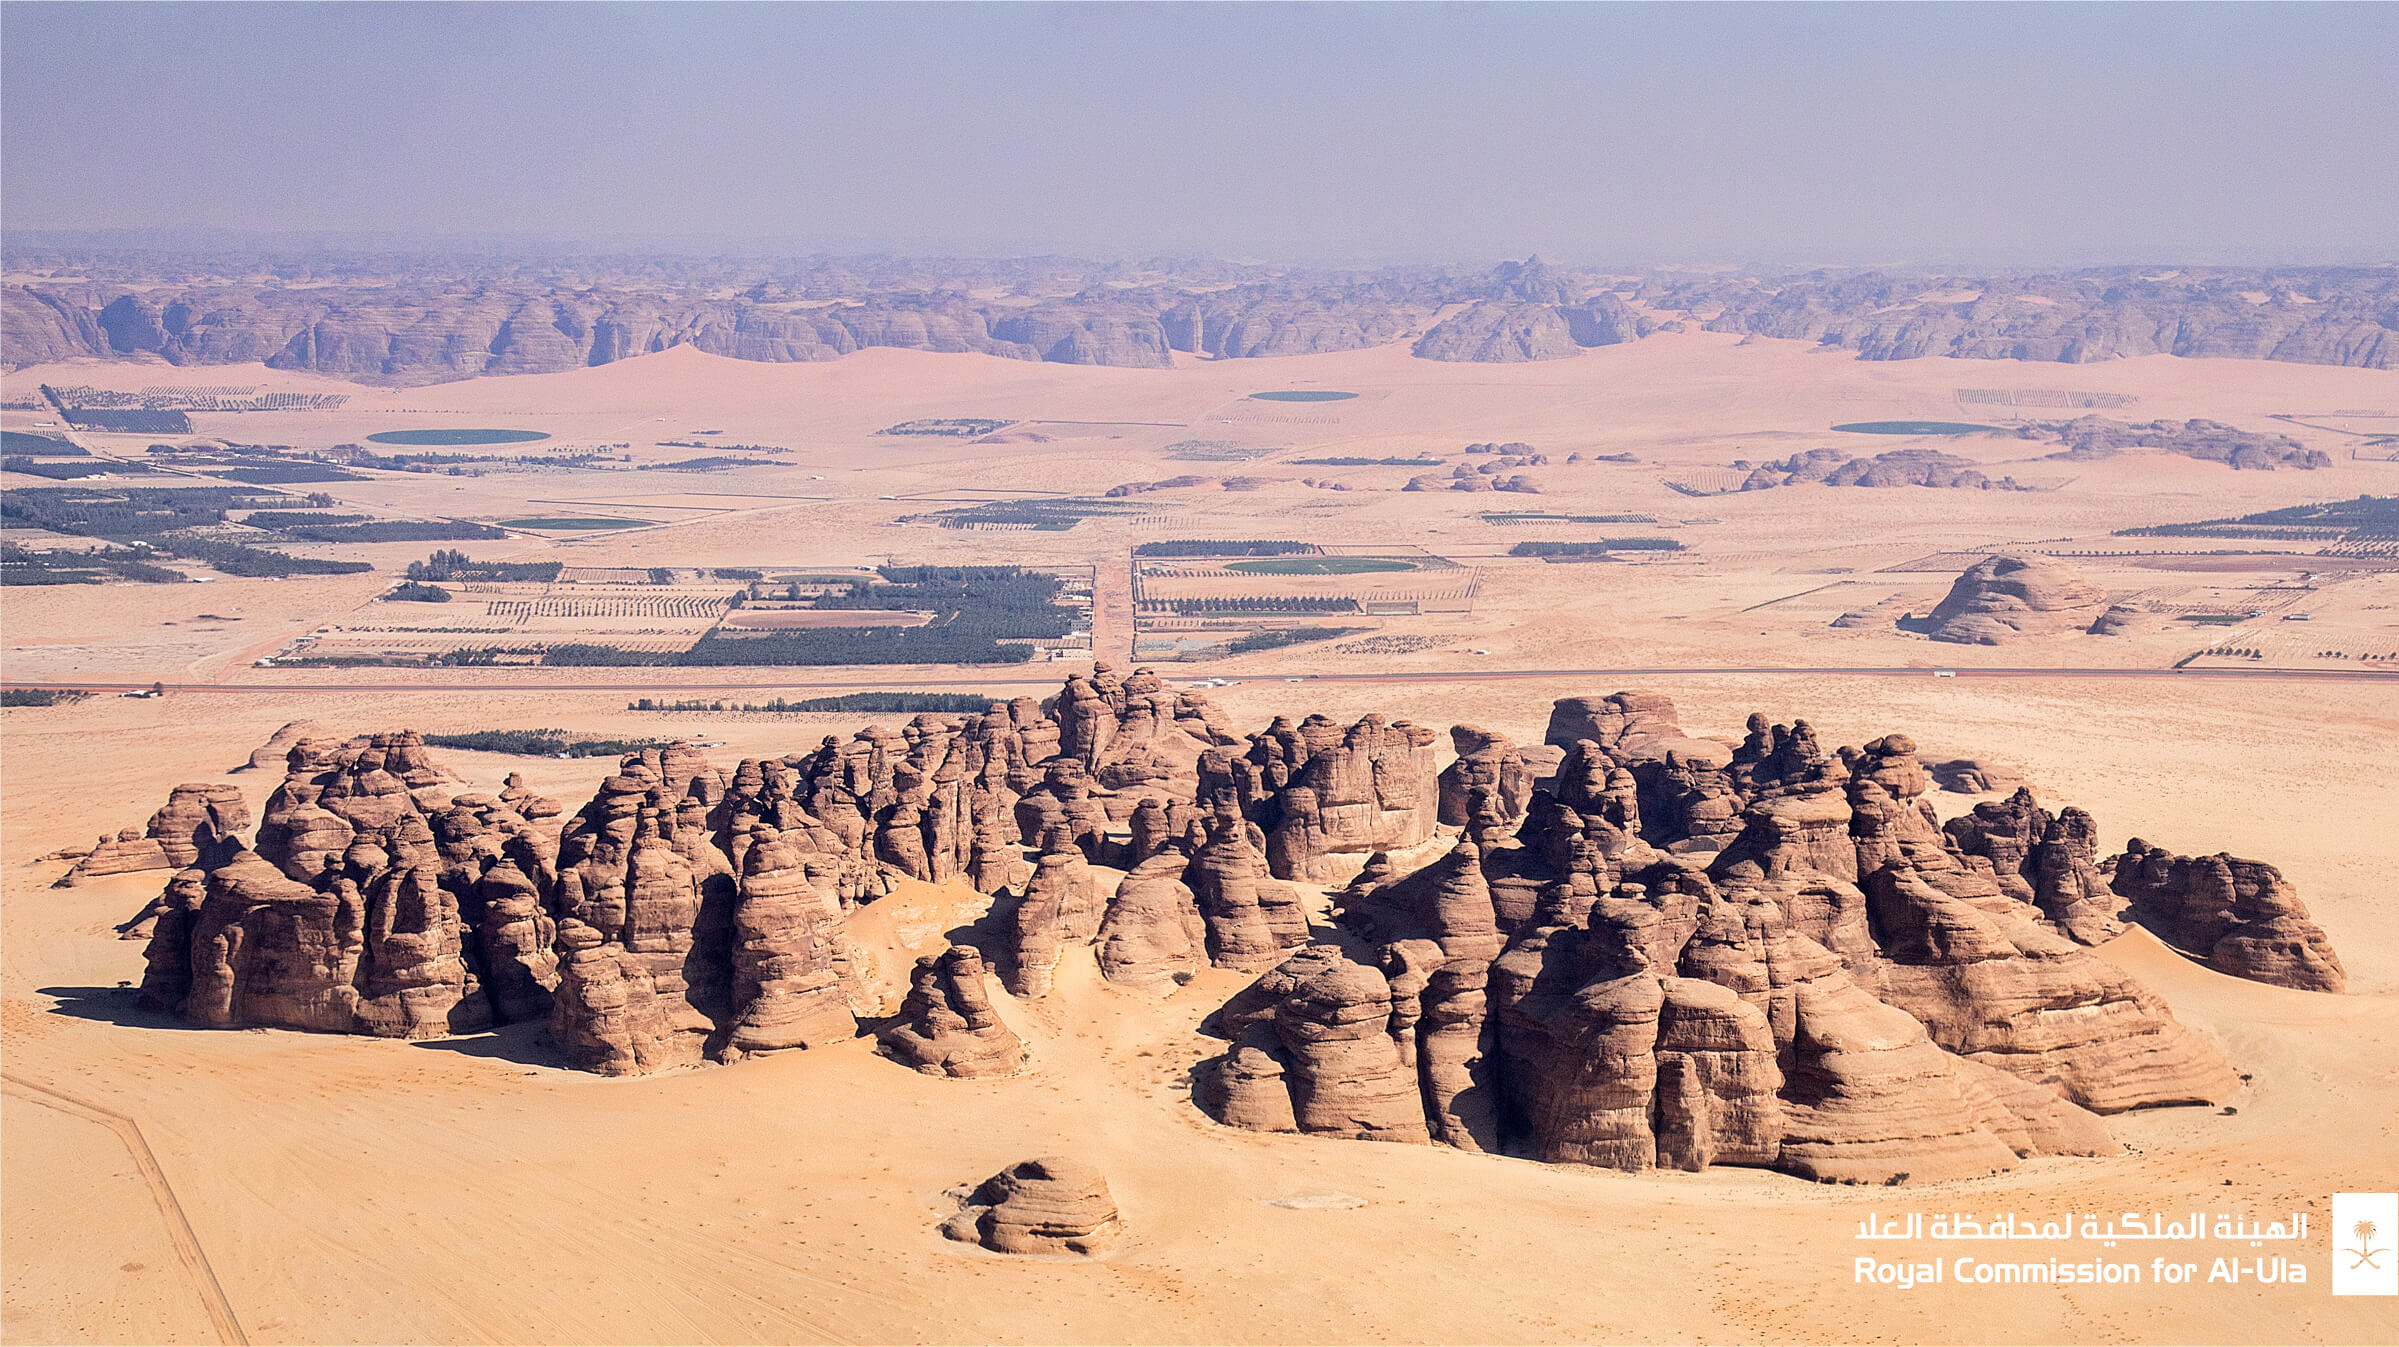 Rock formations in the historic al-Ula valley, Saudi Arabia, future home of a Jean Nouvel luxury resort